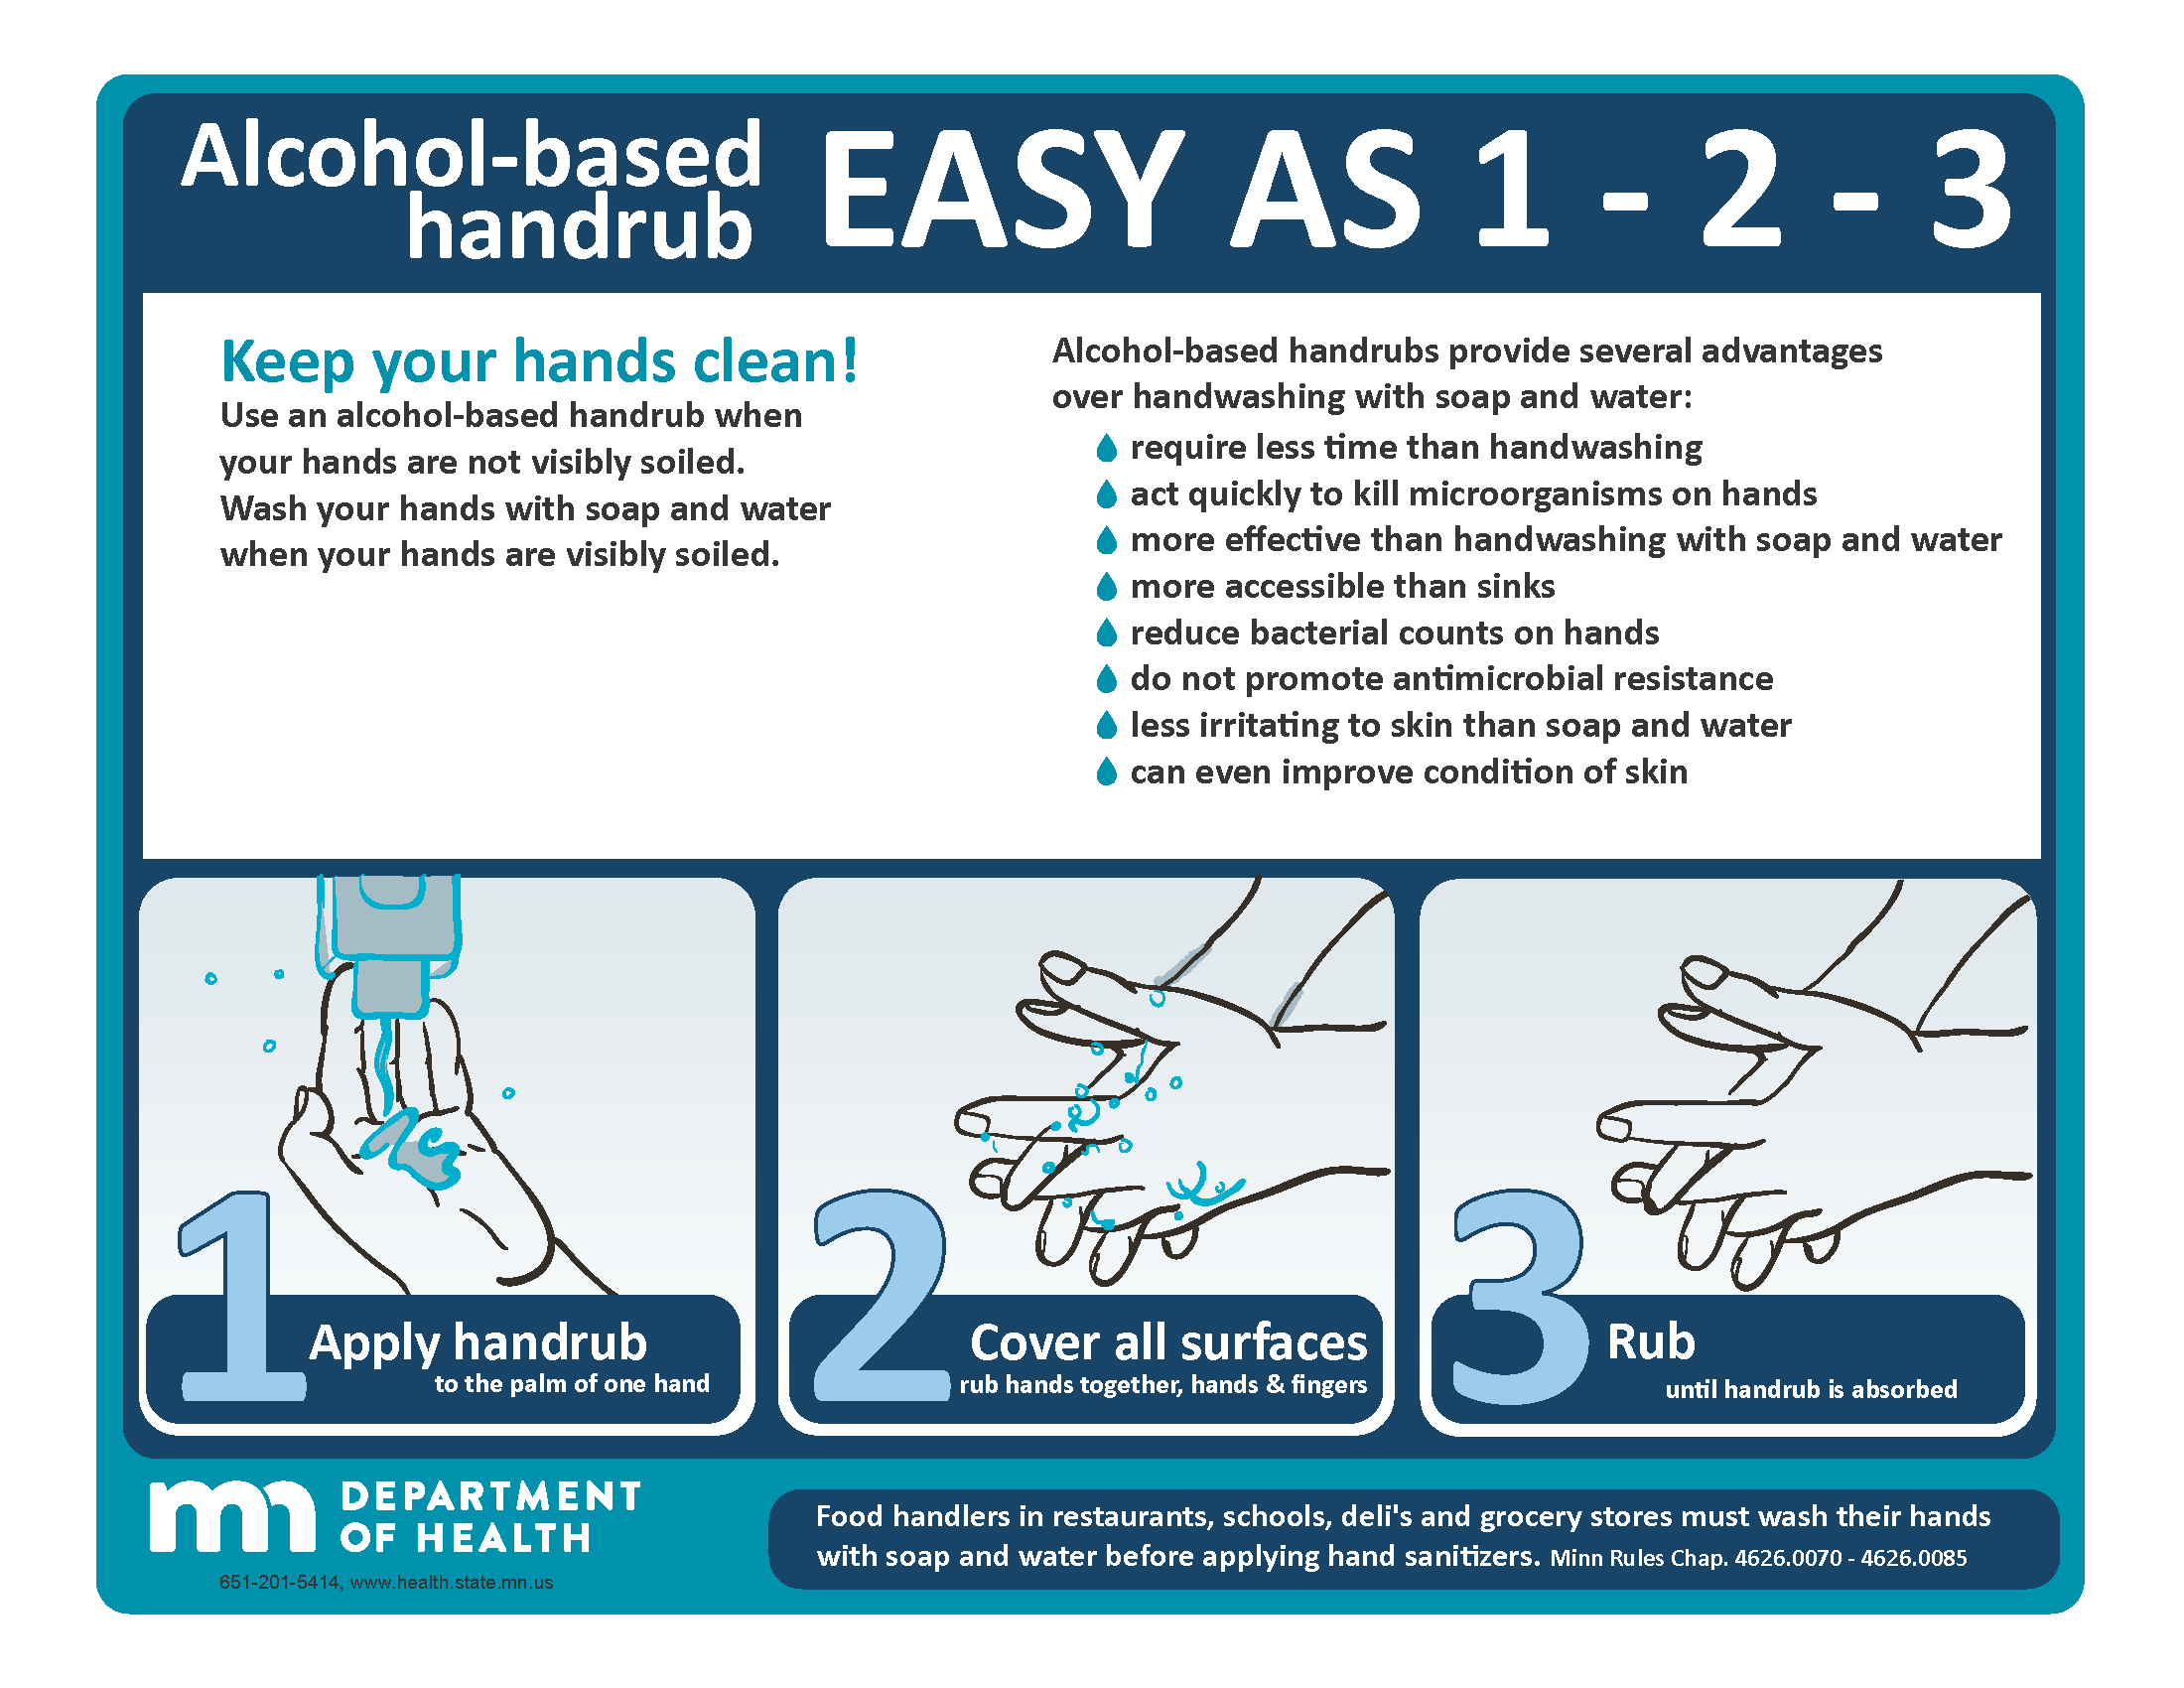 image of the alcohol handrub easy as 1 2 3 poster.